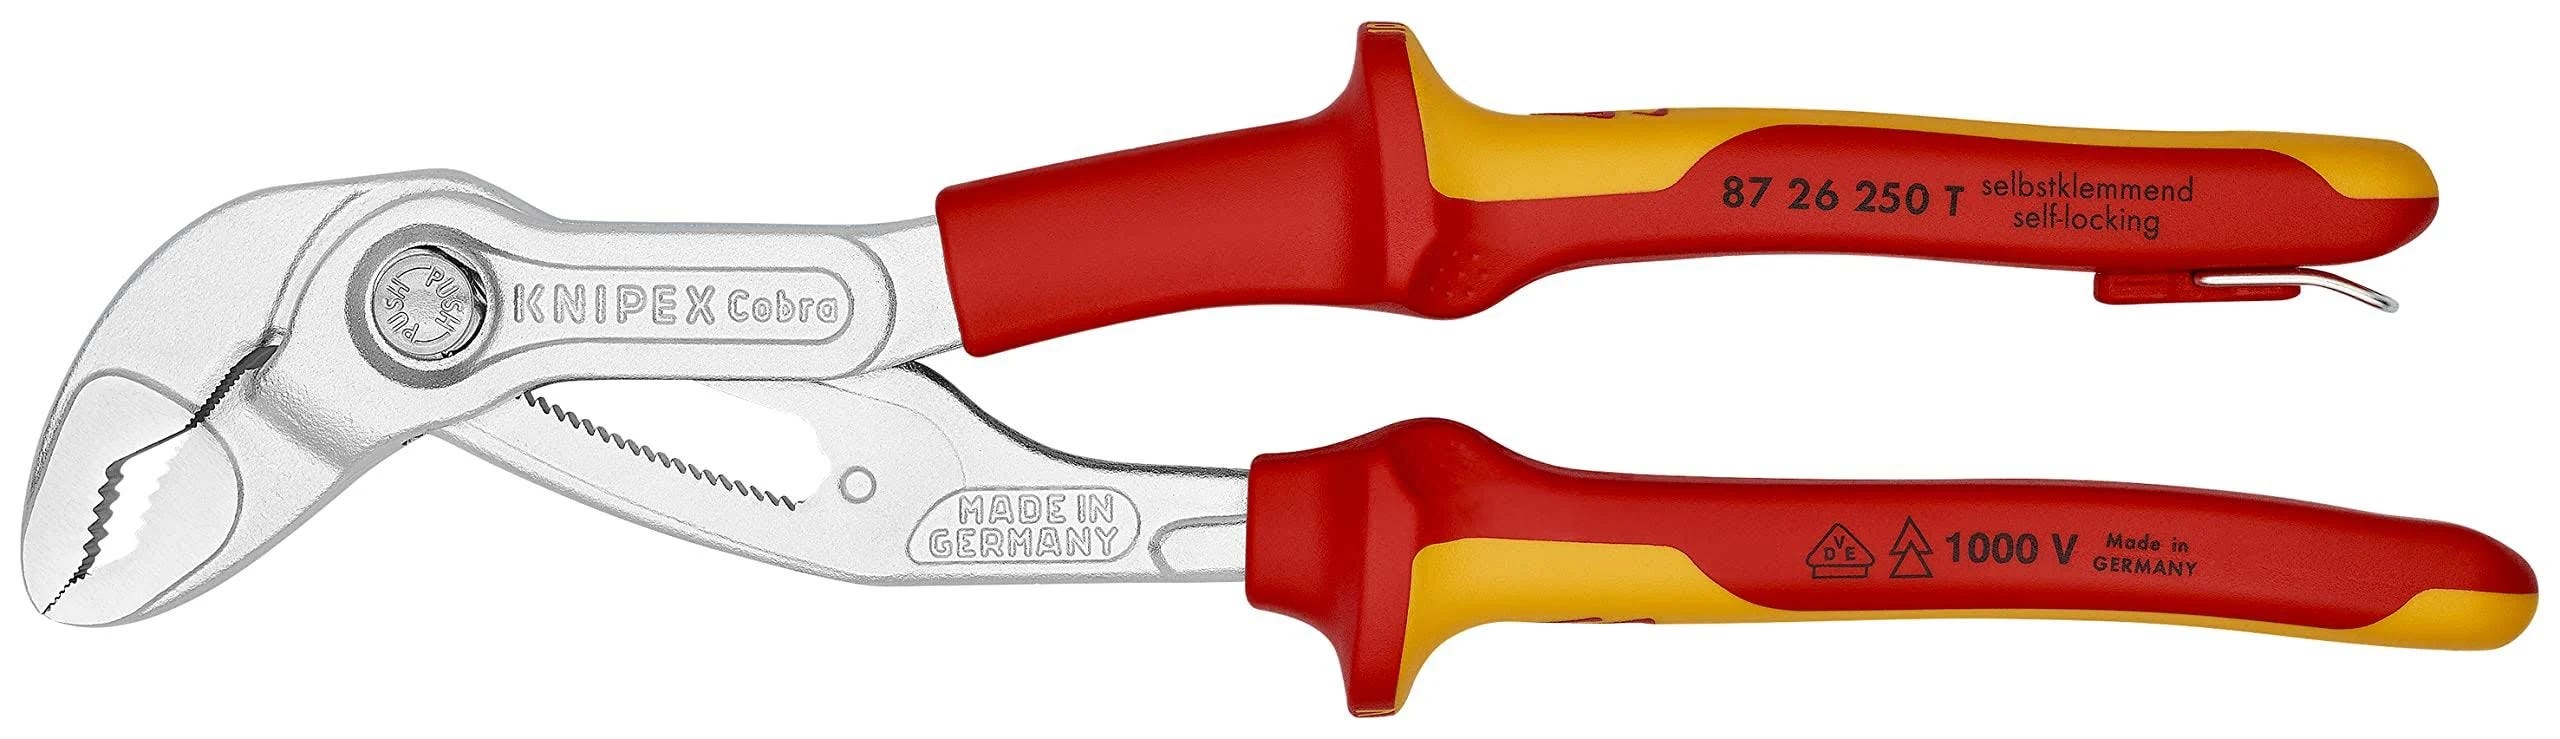 Knipex Cobra High-Tech Water Pump Pliers 1000V Insulated-Tethered Attachment | Image